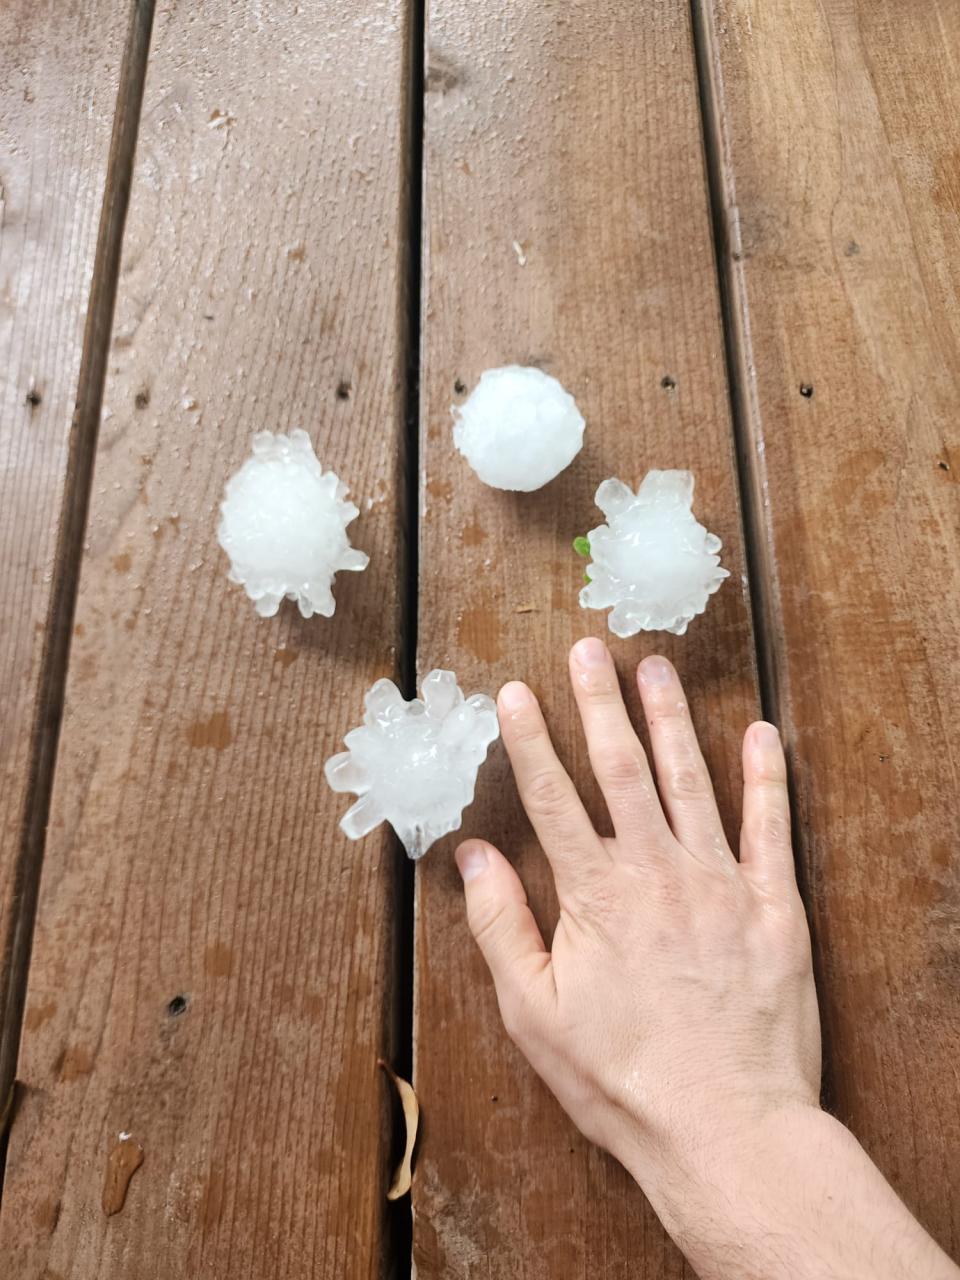 Hail in North/Central Austin during a storm on Tuesday.